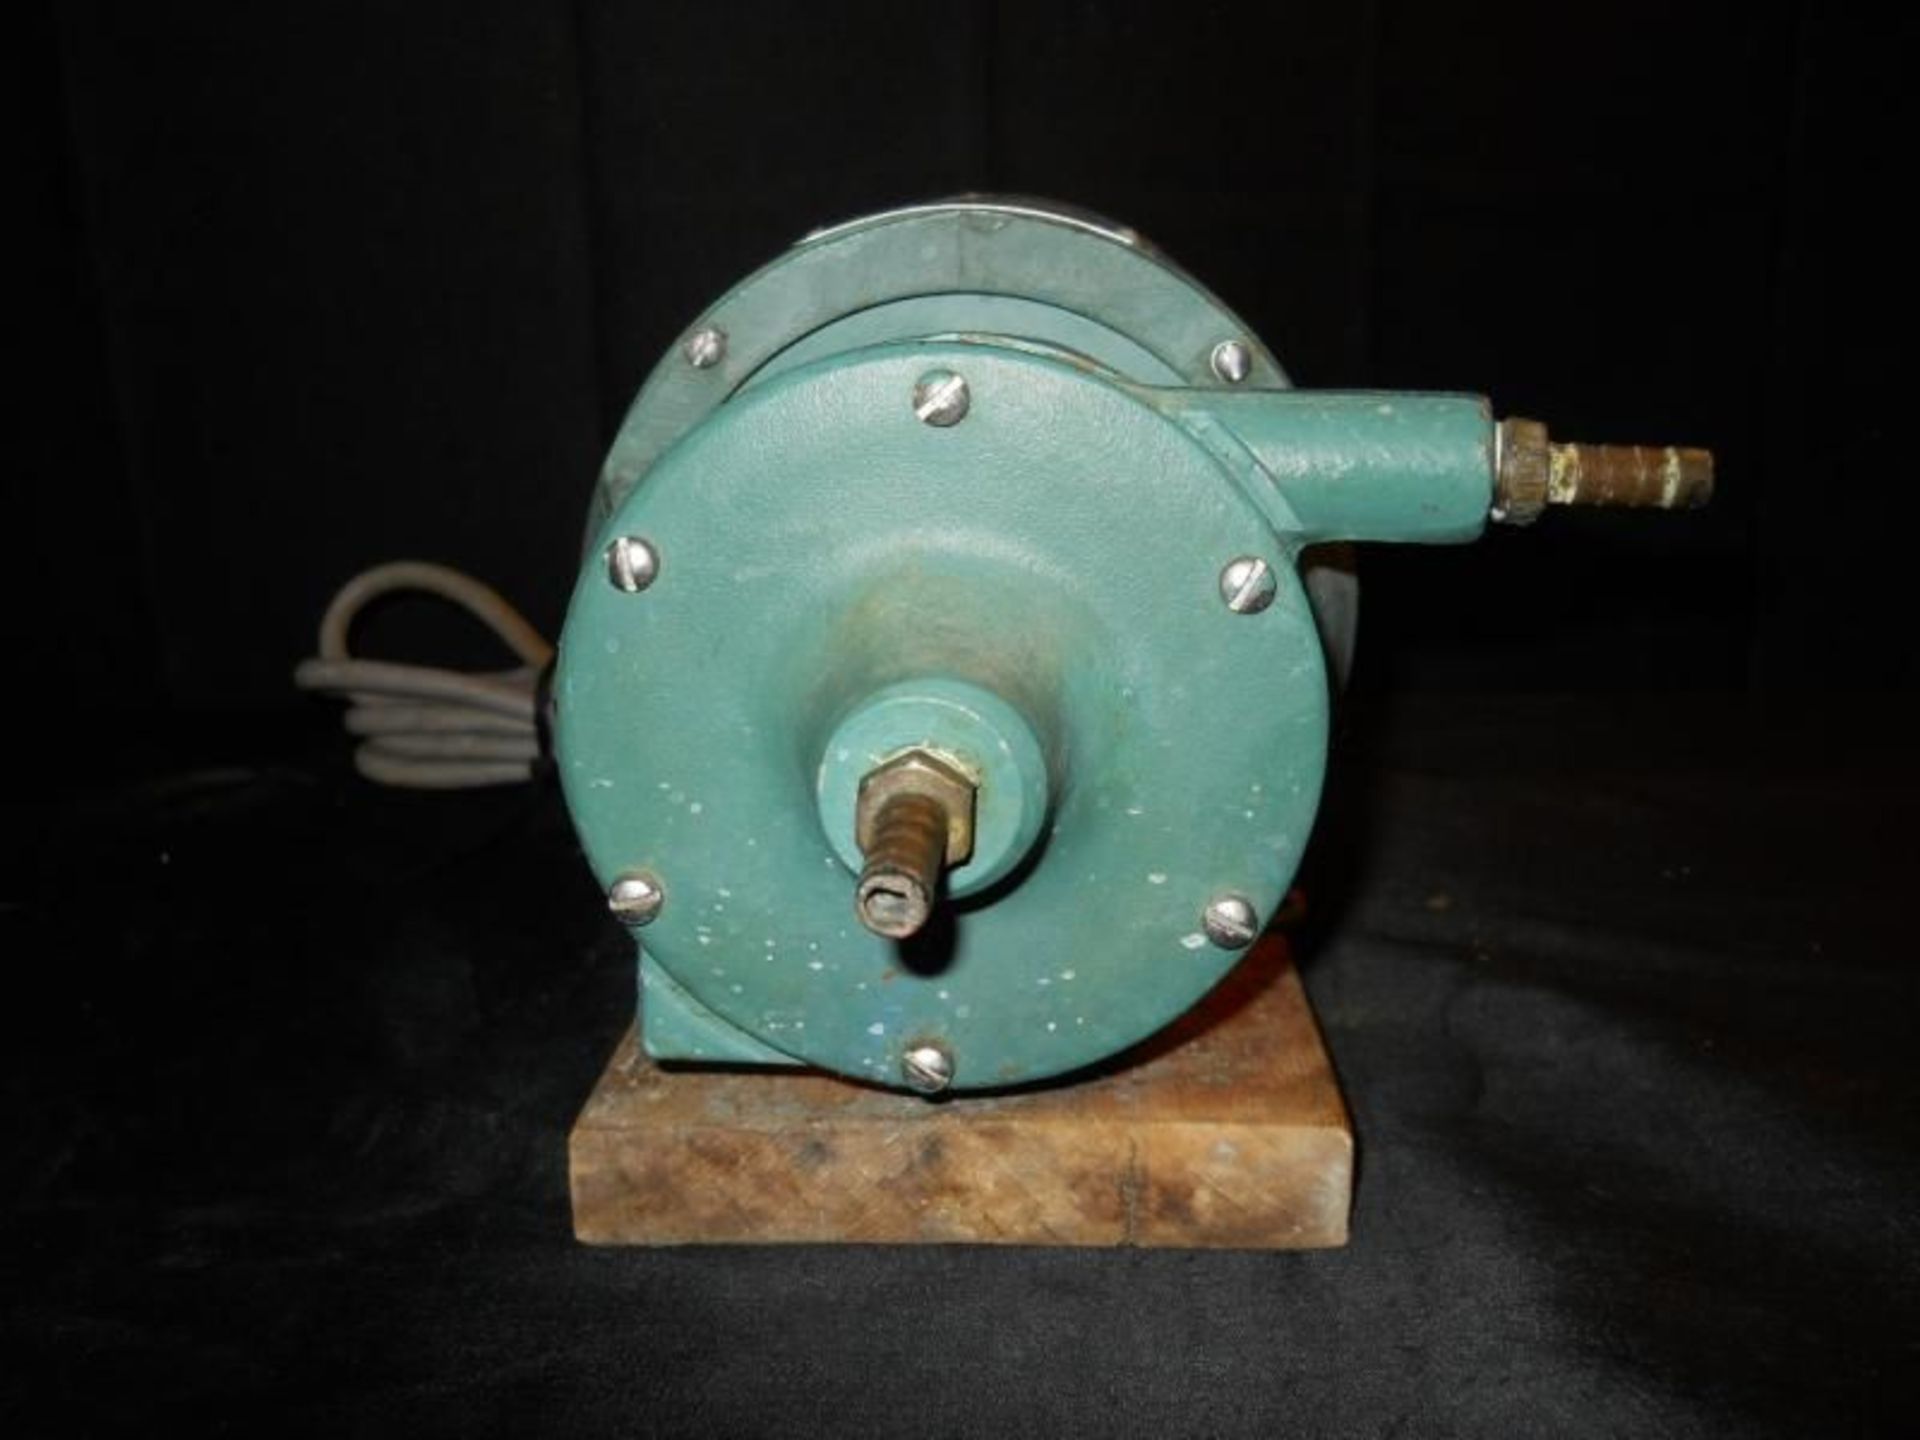 Eastern Pulsafeeder Pump Model D-6 (D6) w/ GE 1/8 HP Motor (1725 RPM), Qty 1, 321201000827 - Image 4 of 8